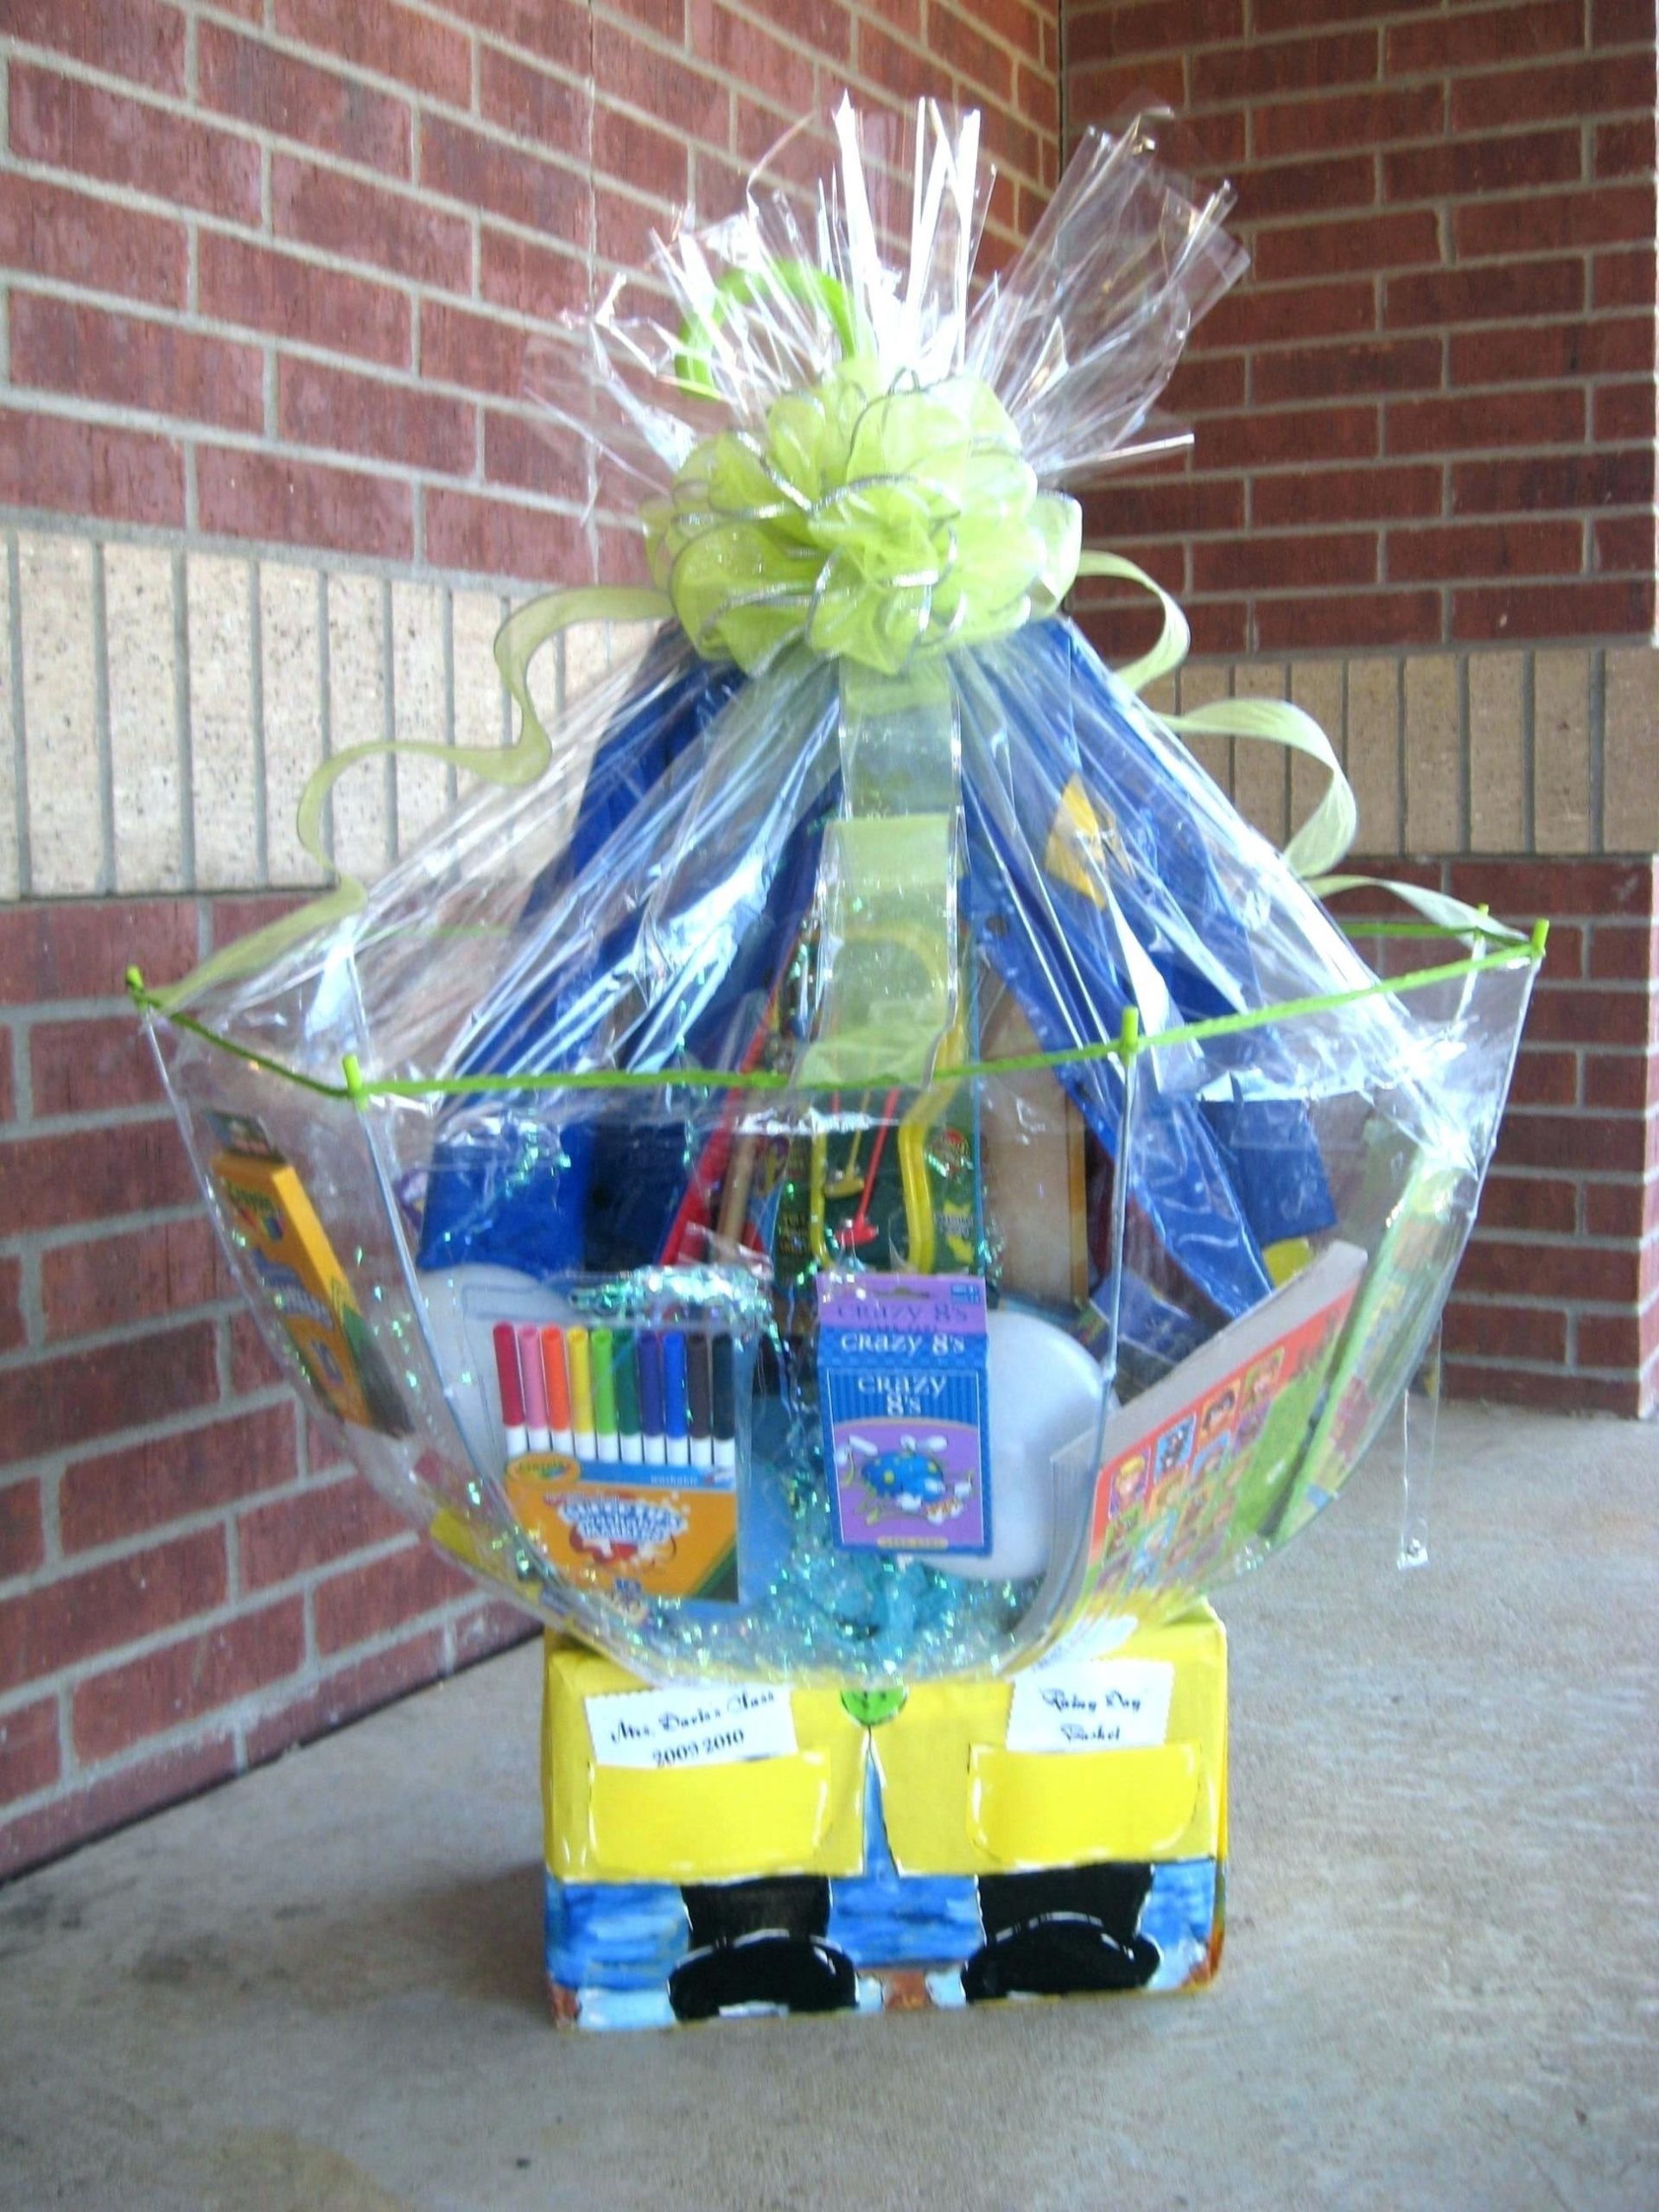 Gift Basket Ideas For Silent Auction
 10 Cute Silent Auction Gift Basket Ideas 2019